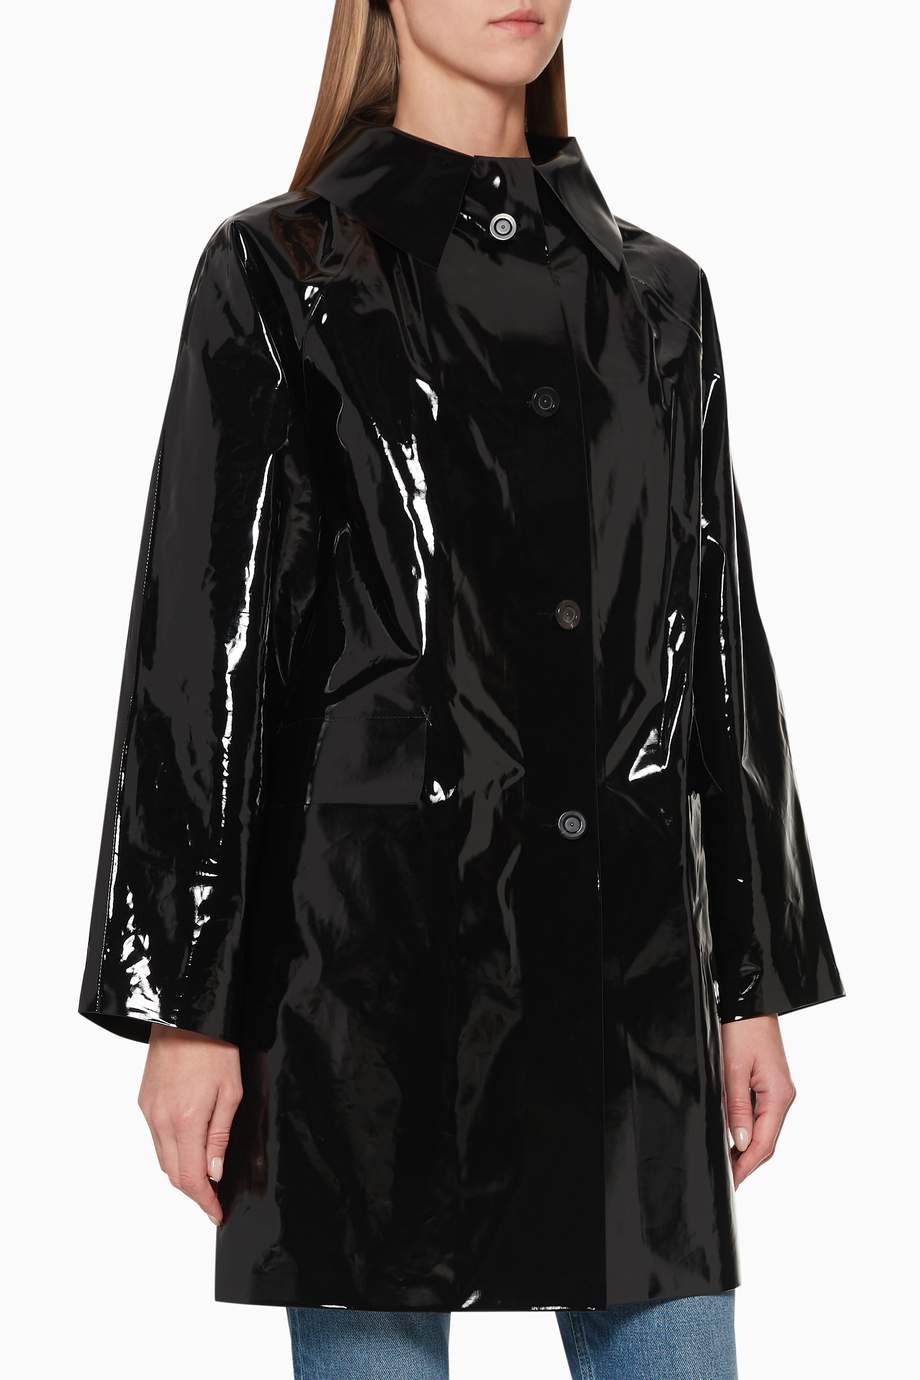 Shop Kassl Black Lacquered Trench Coat for Women | Ounass UAE